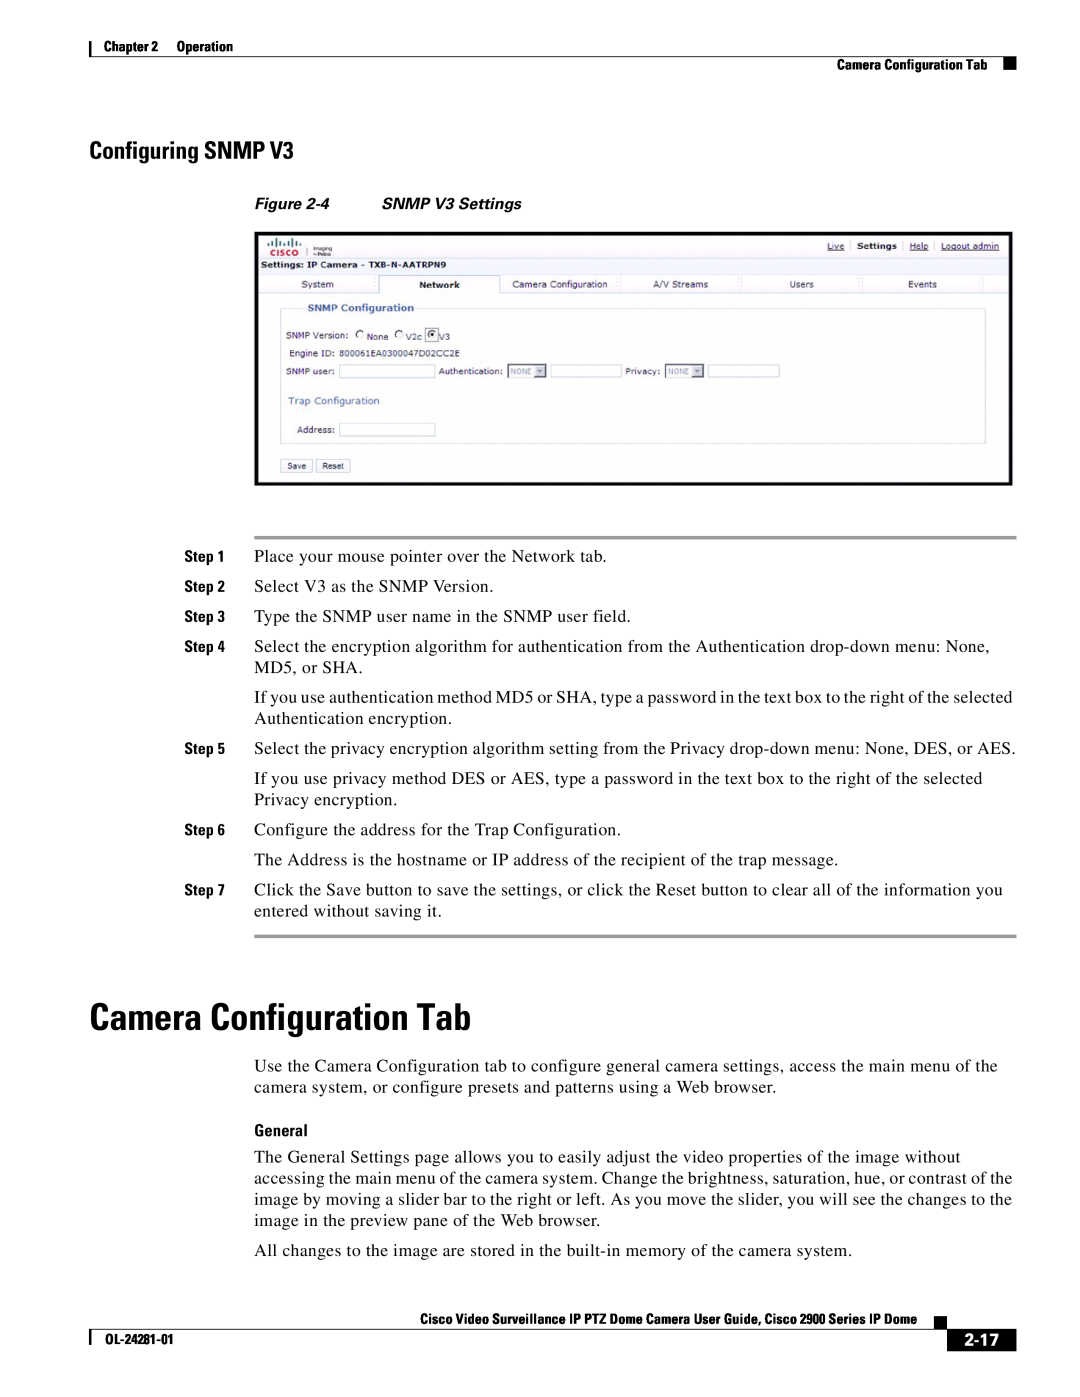 Cisco Systems 2900, OL-24281-01 manual Camera Configuration Tab, Configuring SNMP, 2-17 